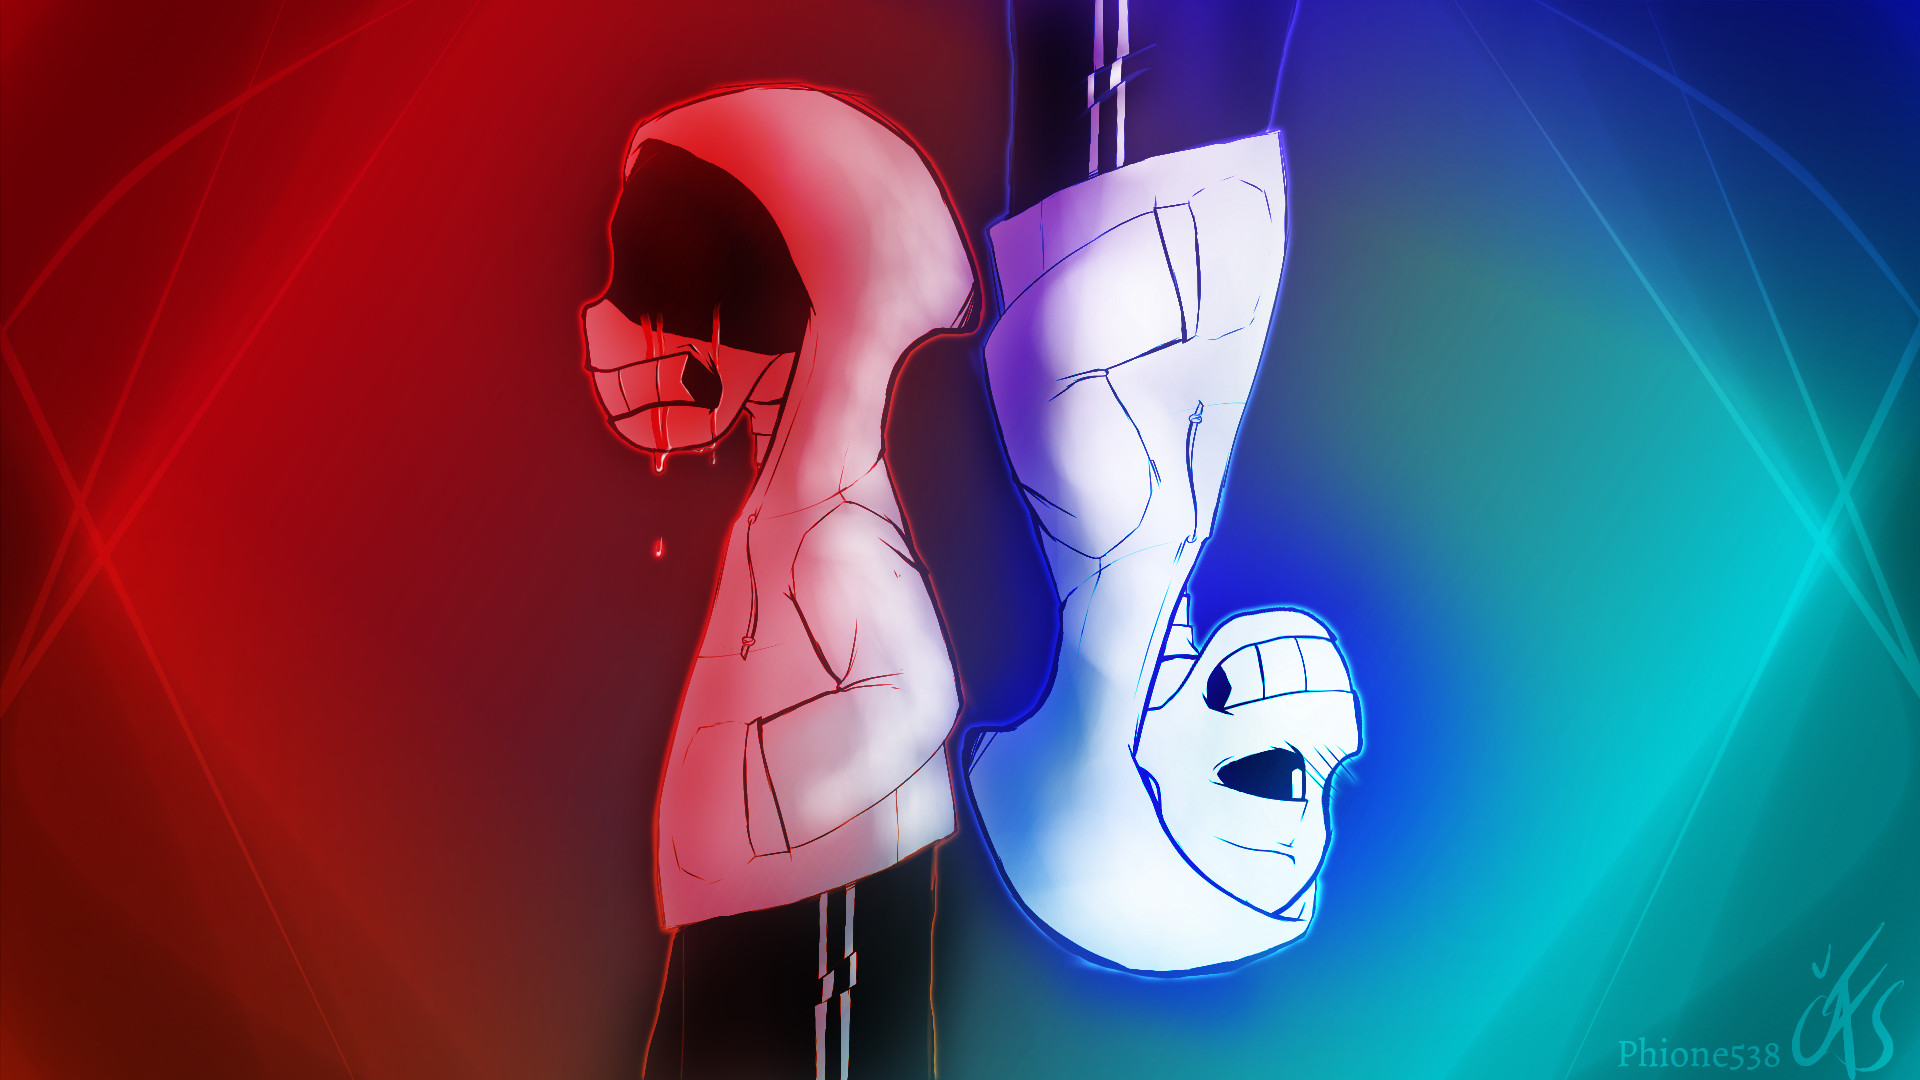 1920x1080 ... Undertale - Both Sides of Sans [HD Wallpaper] by Phione538